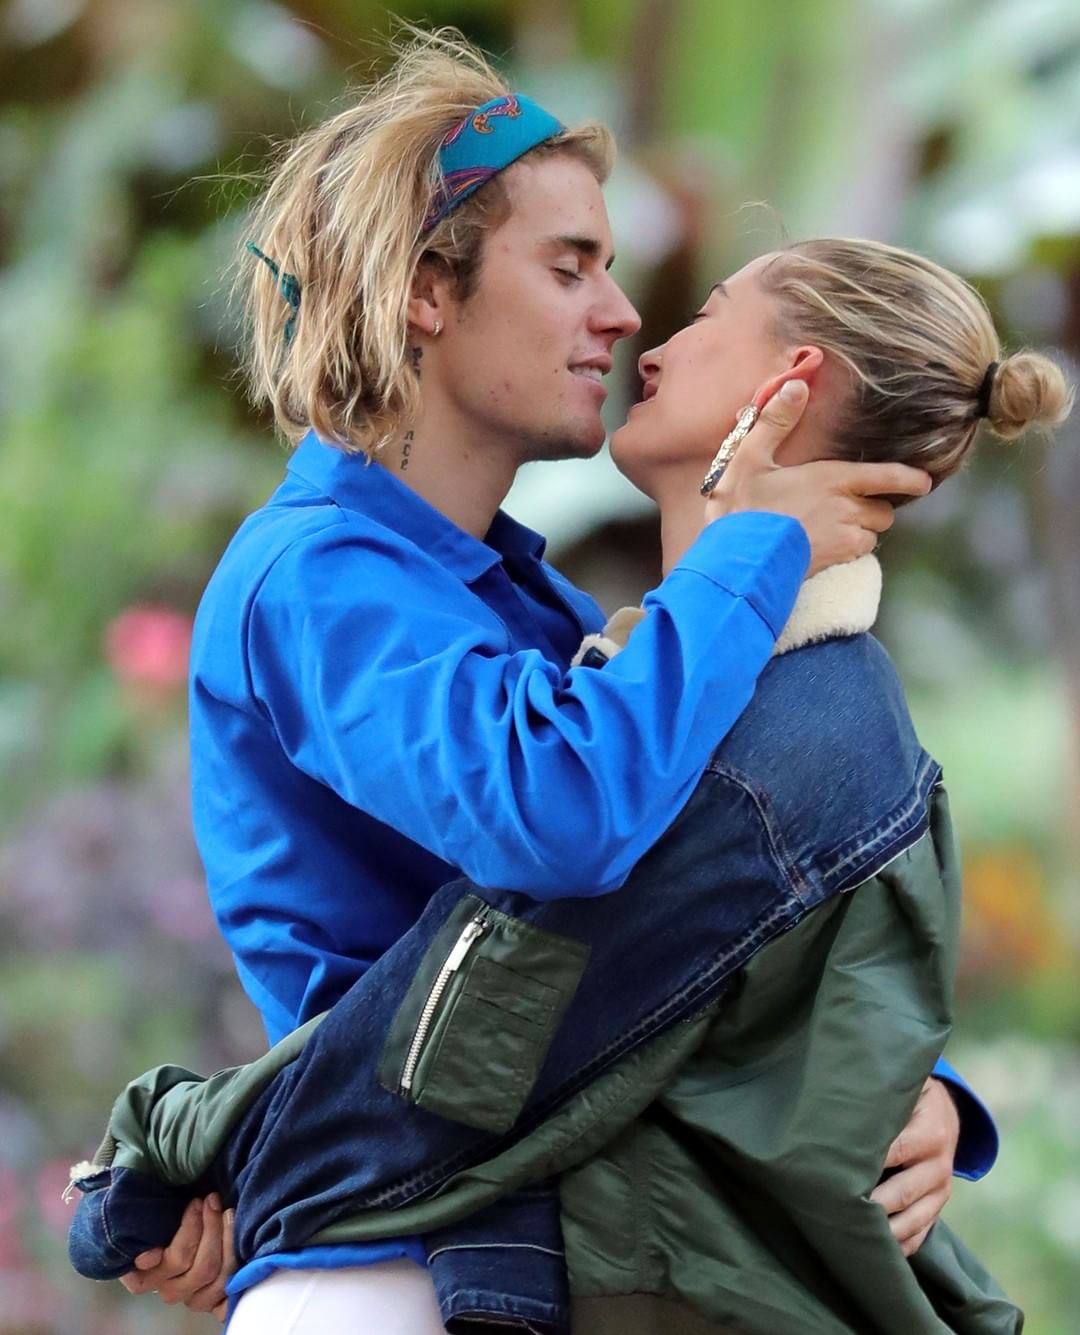 Justin Bieber Hosts First Thanksgiving with Wife Hailey Baldwin